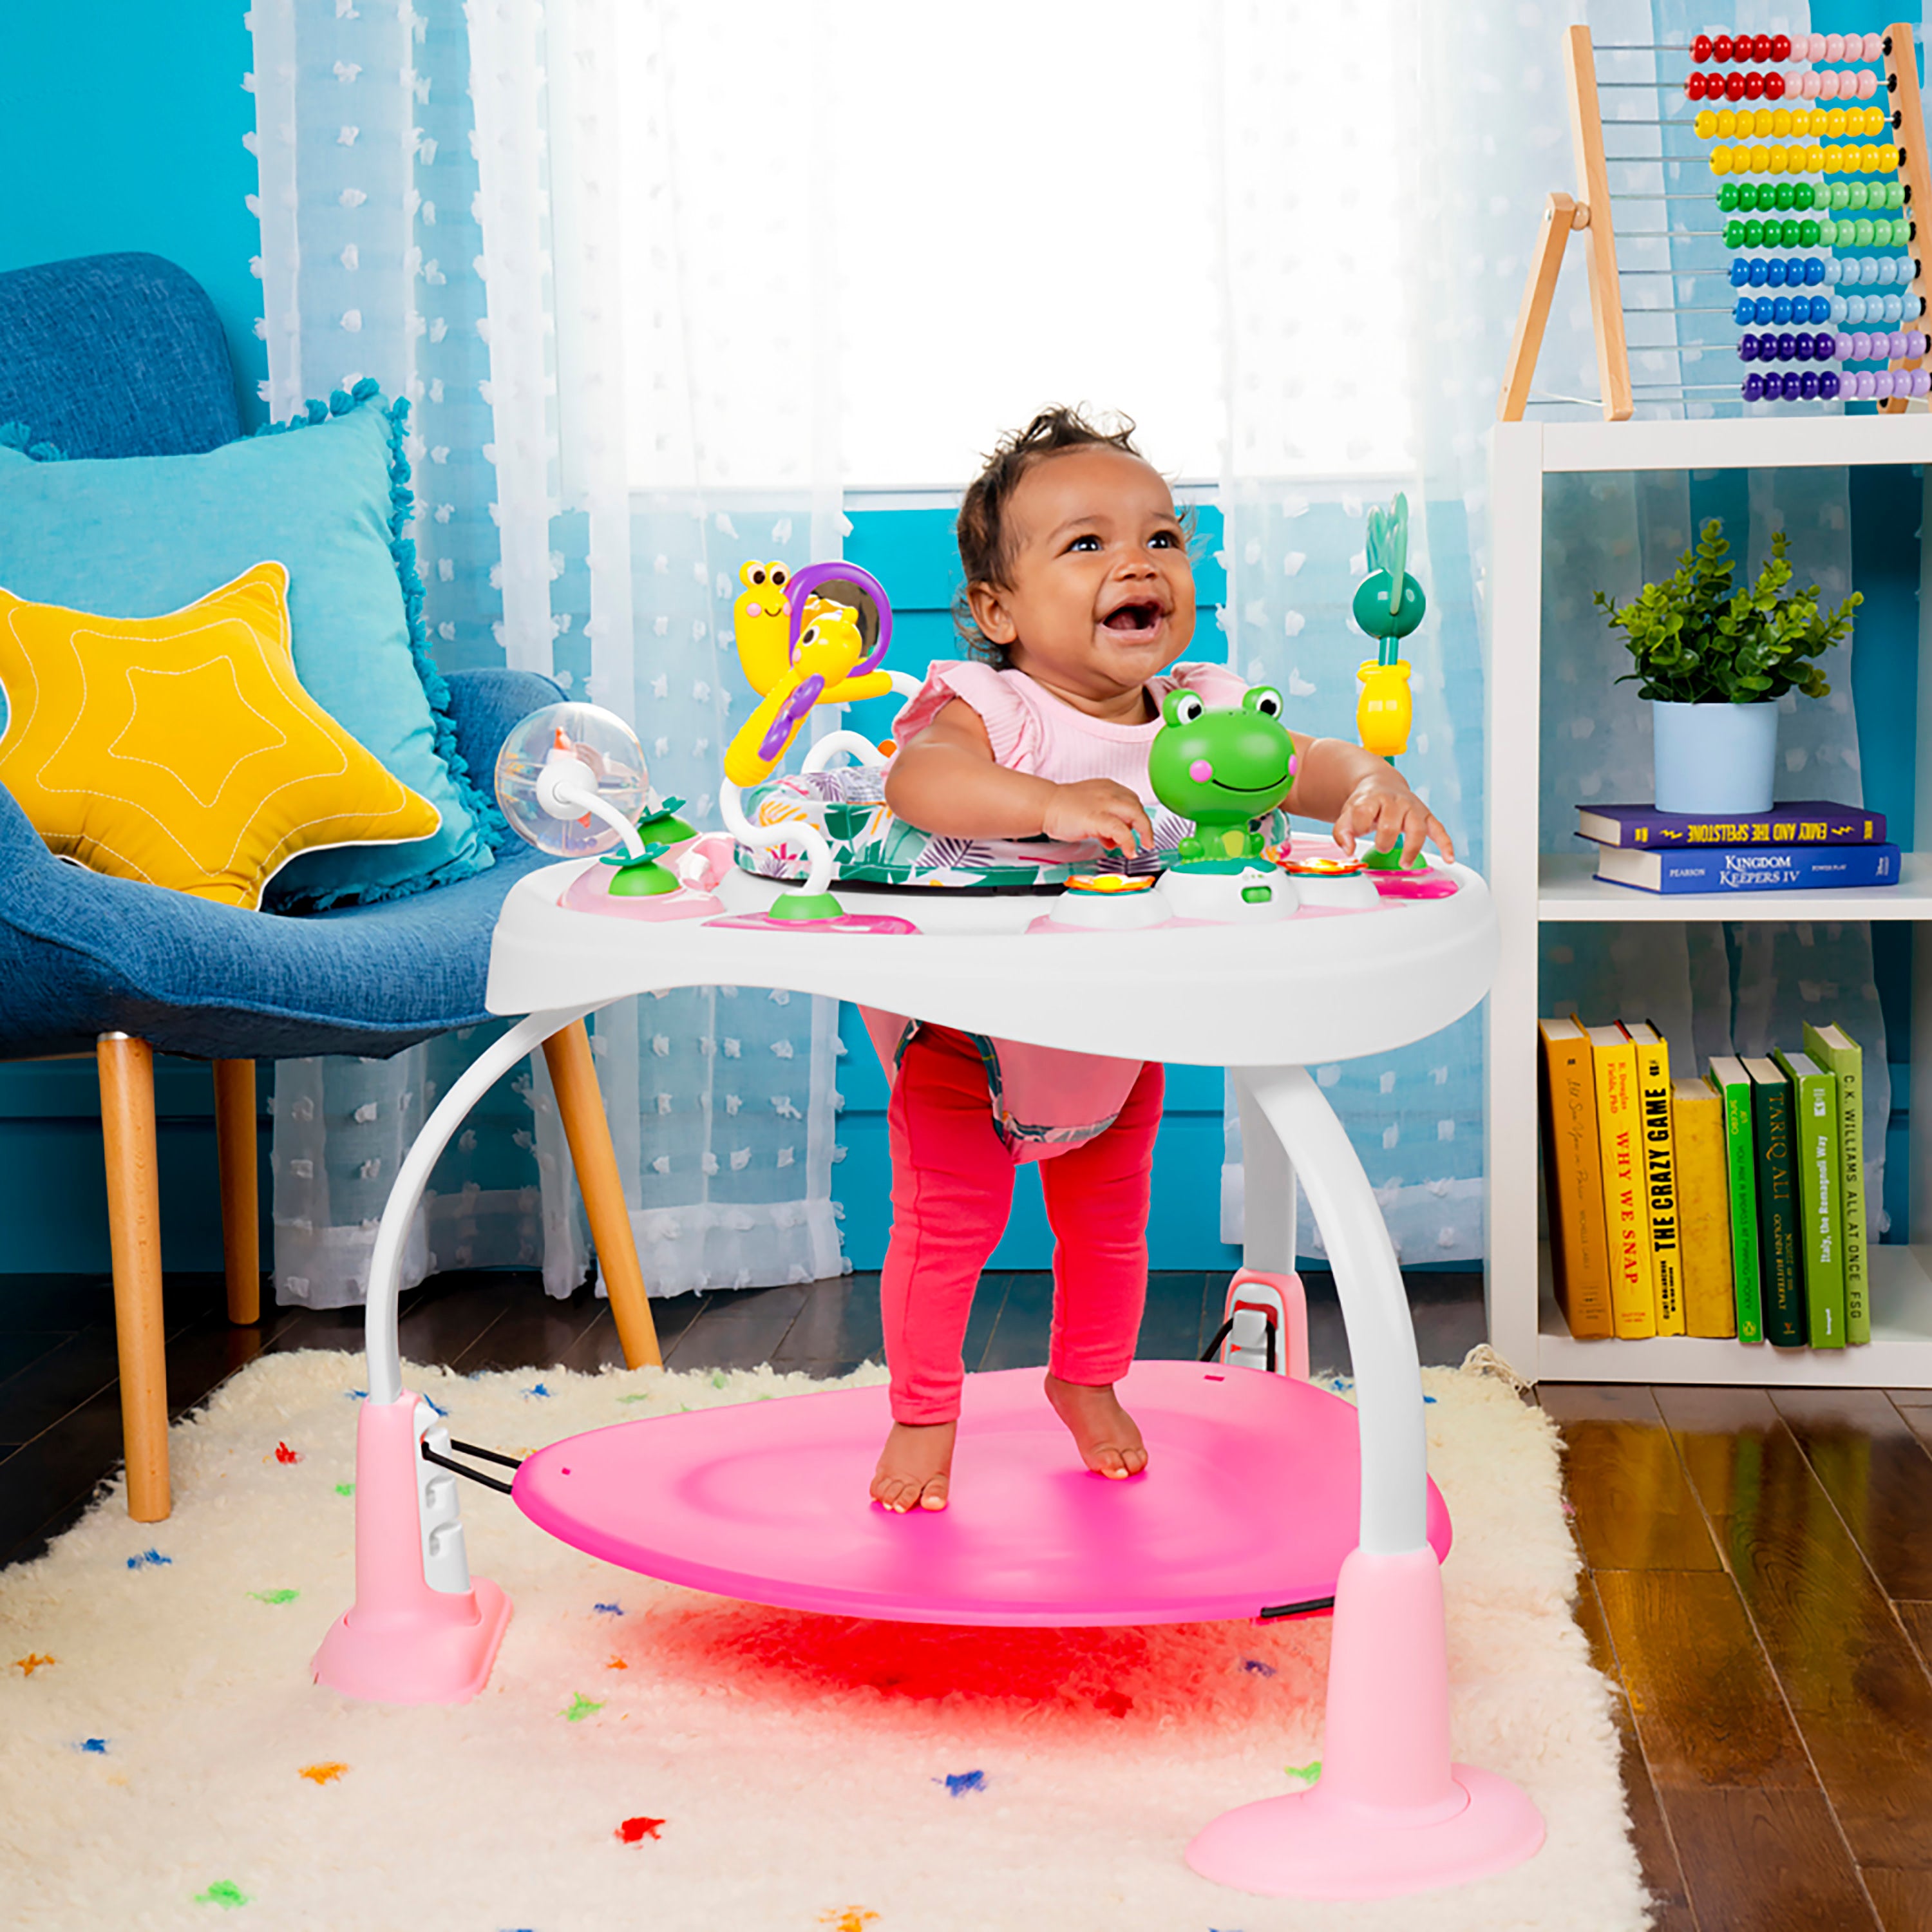 Bright Starts Bounce Baby 2-in-1 Activity Jumper and Table